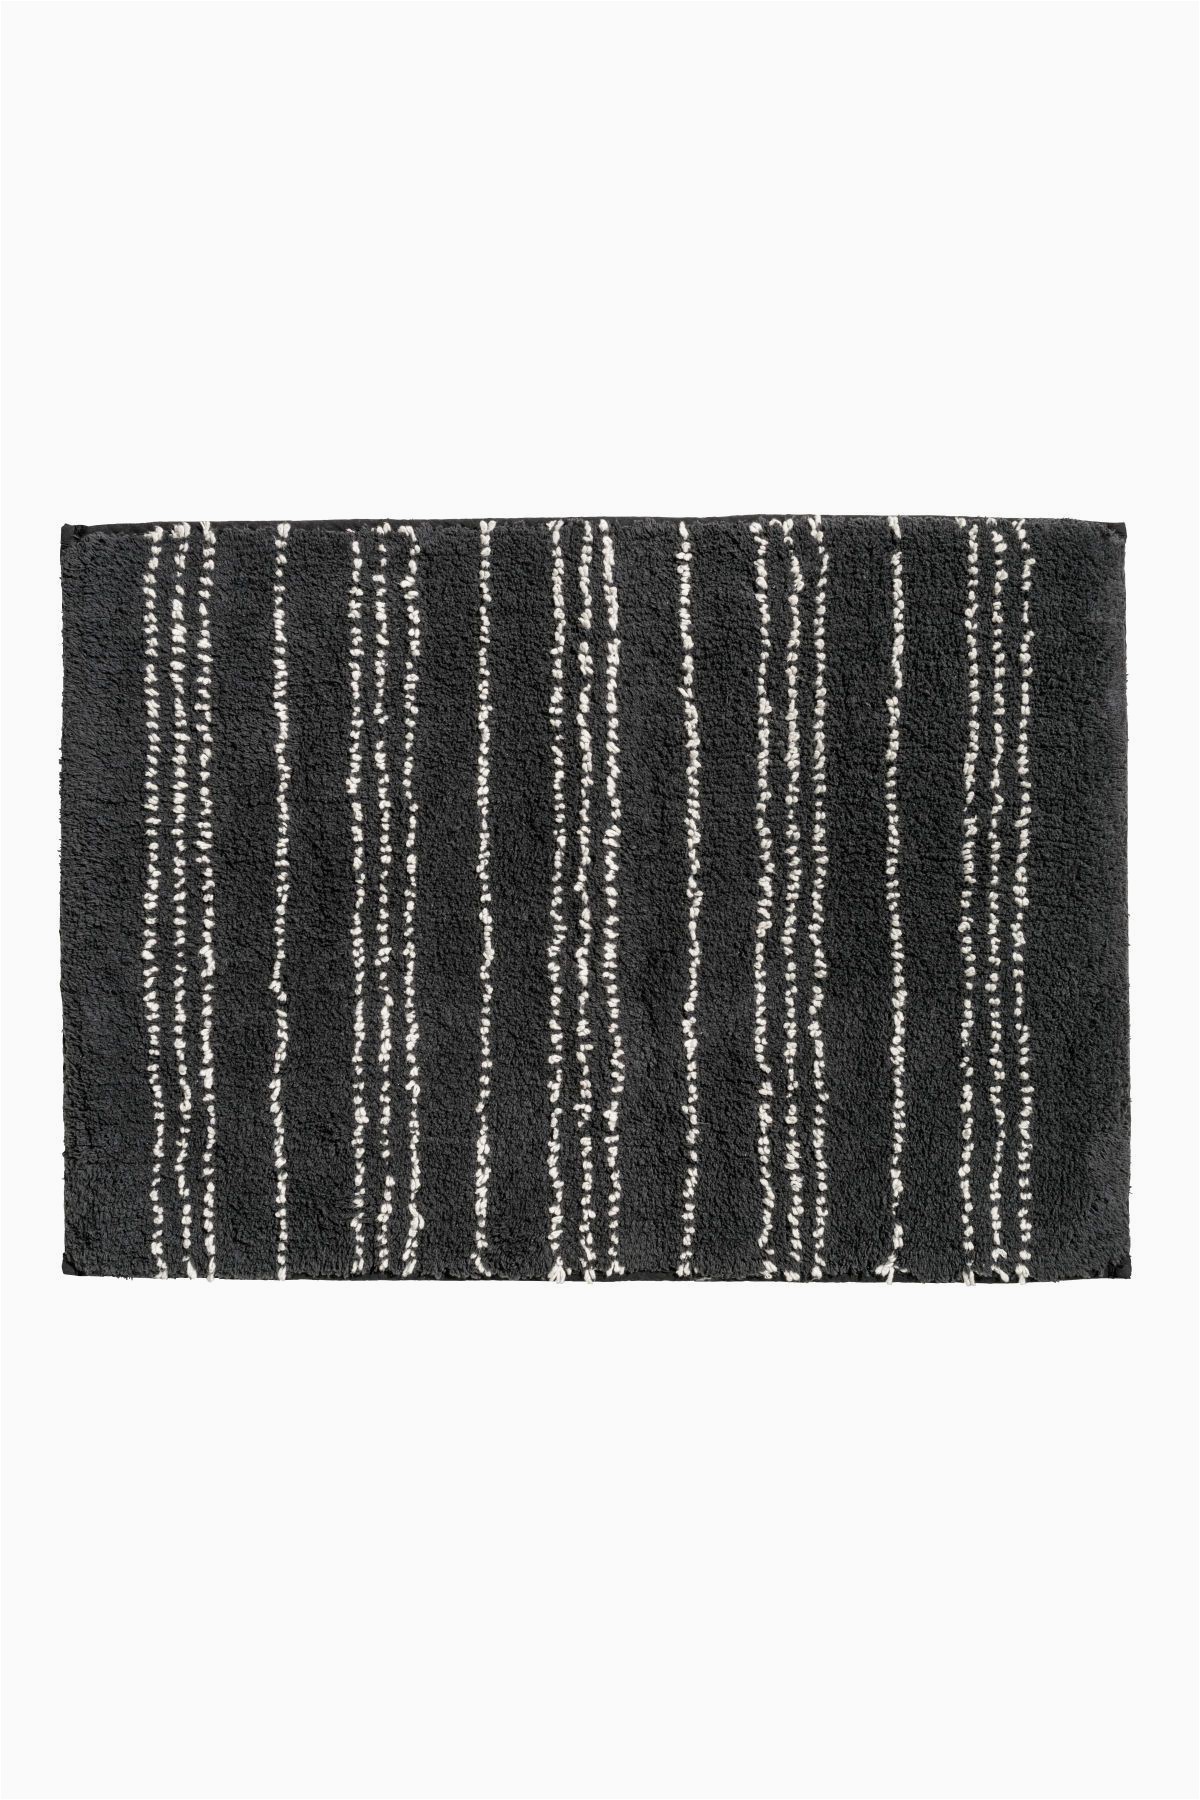 Black and Gray Bath Rugs Charcoal Gray White Patterned Rectangular Bath Mat In